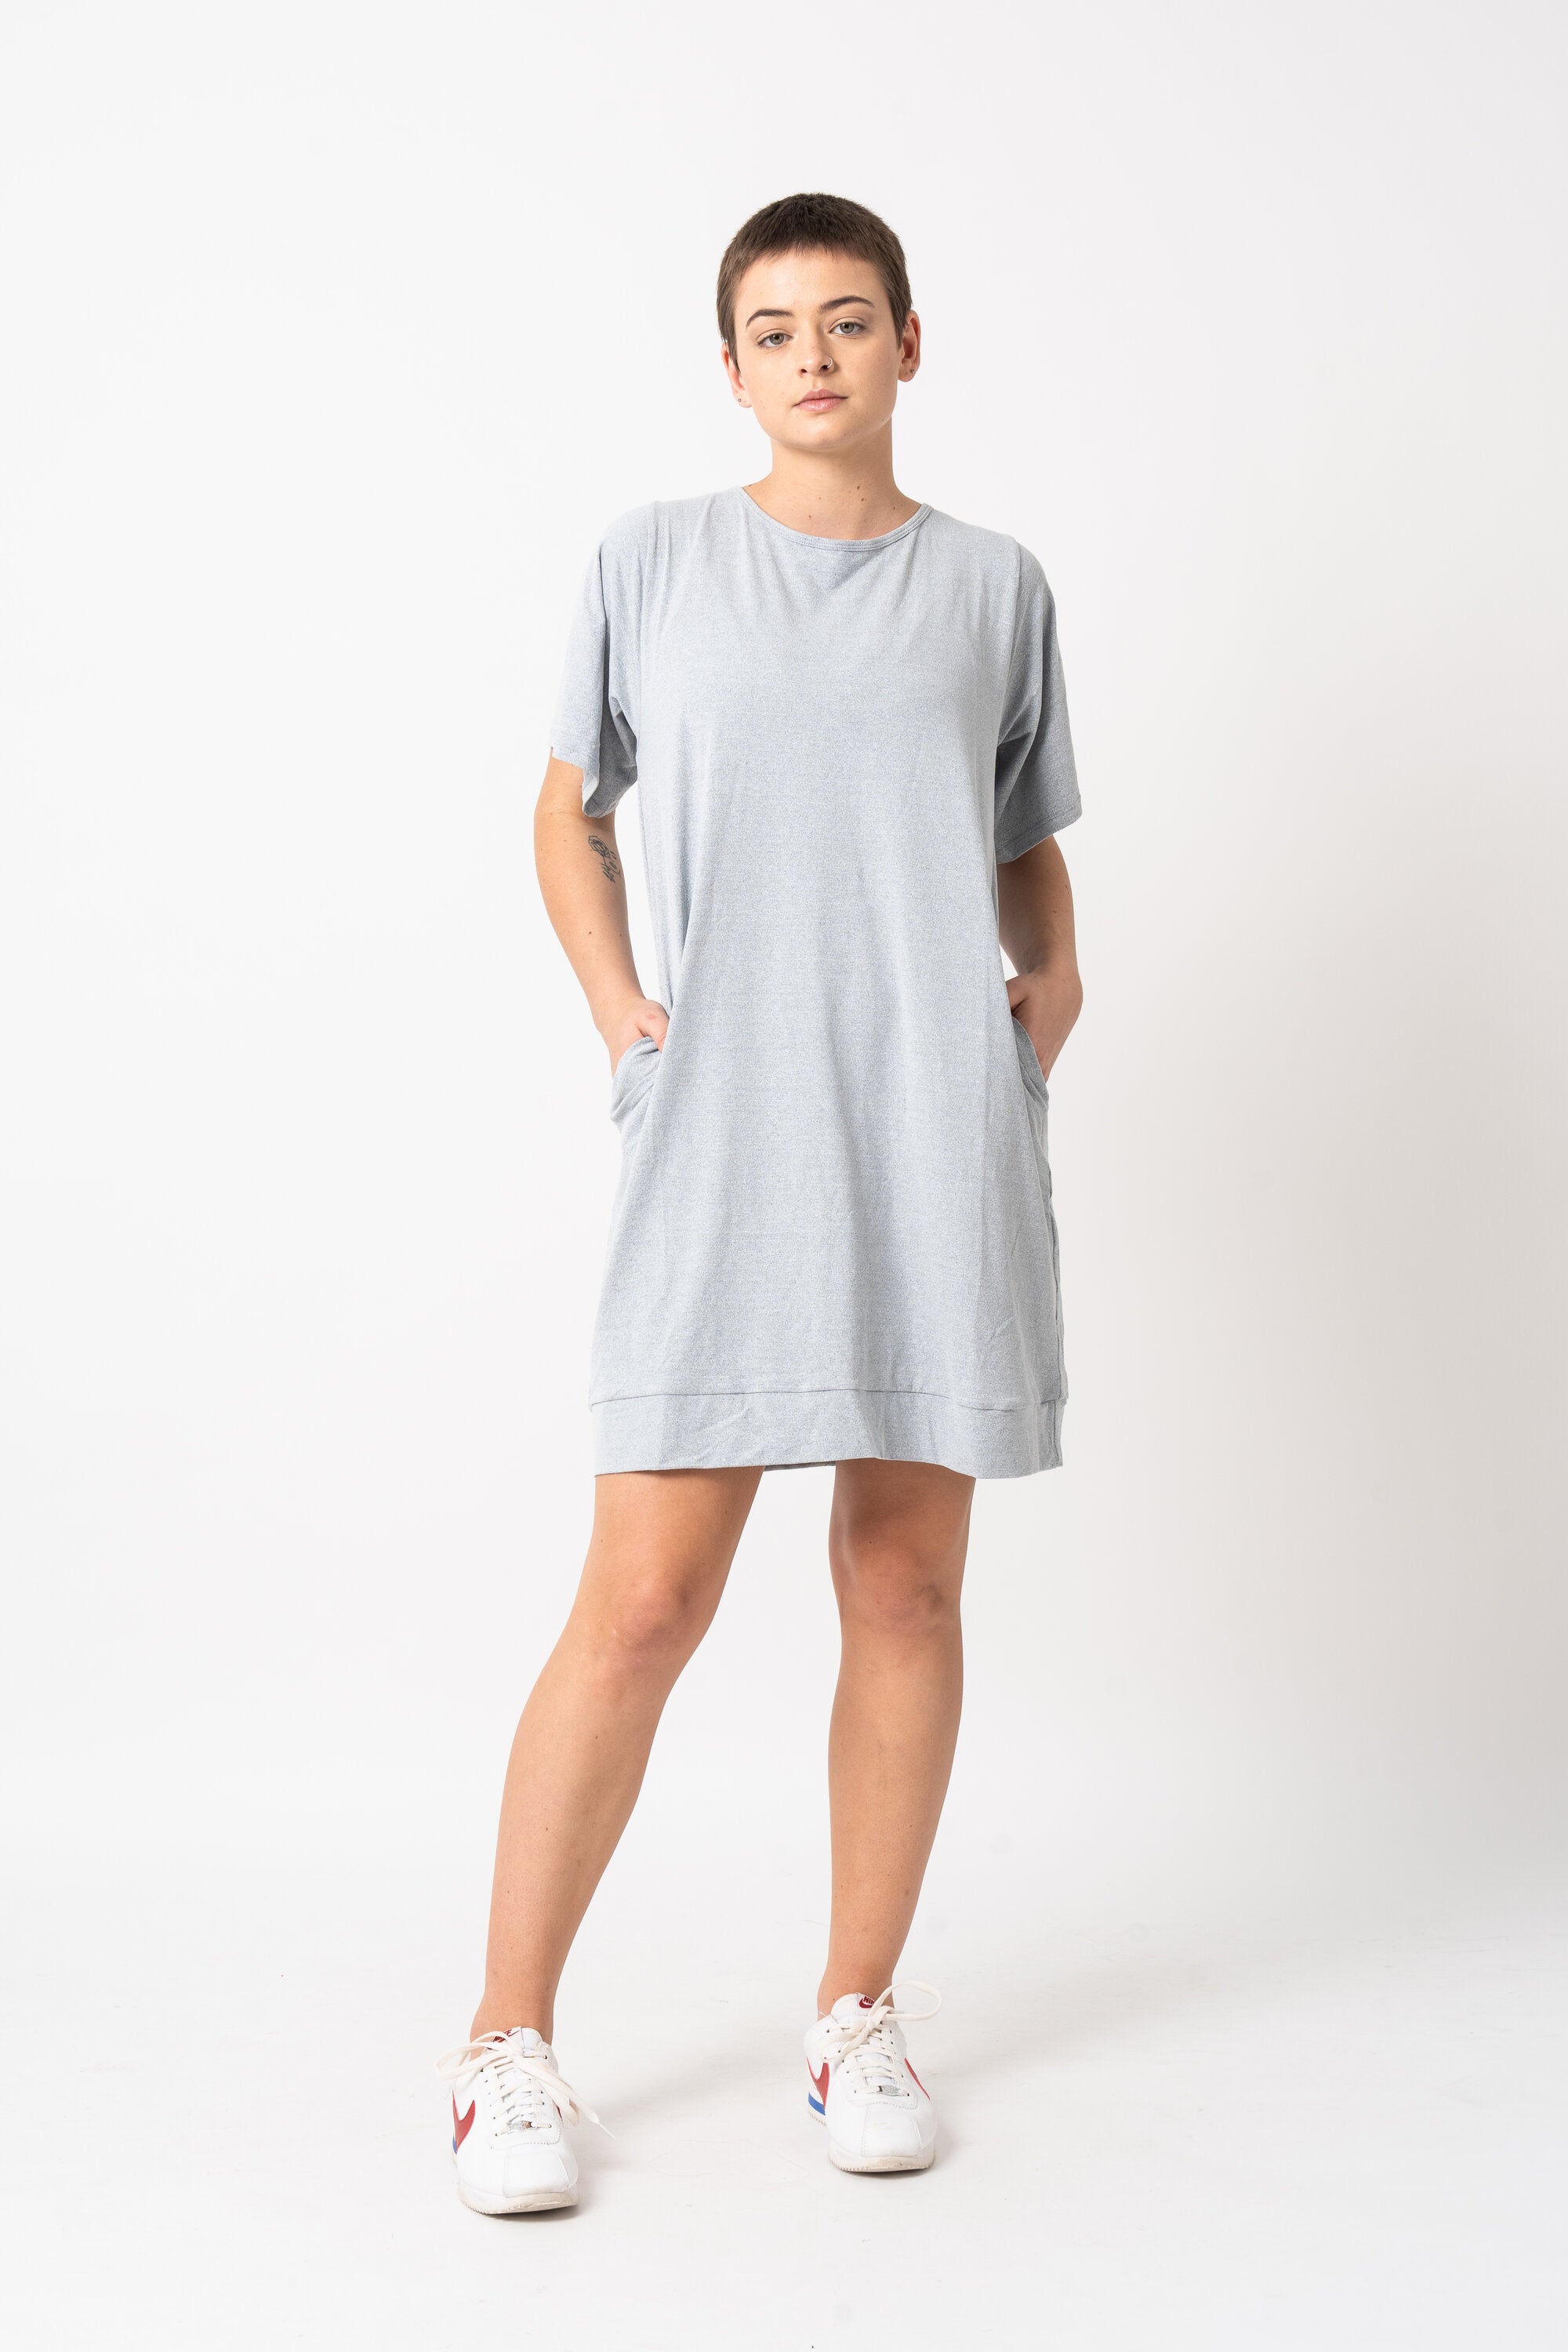 Heather Grey | Lazy Girl Dress Tee | Soft To Touch – Exoticathletica